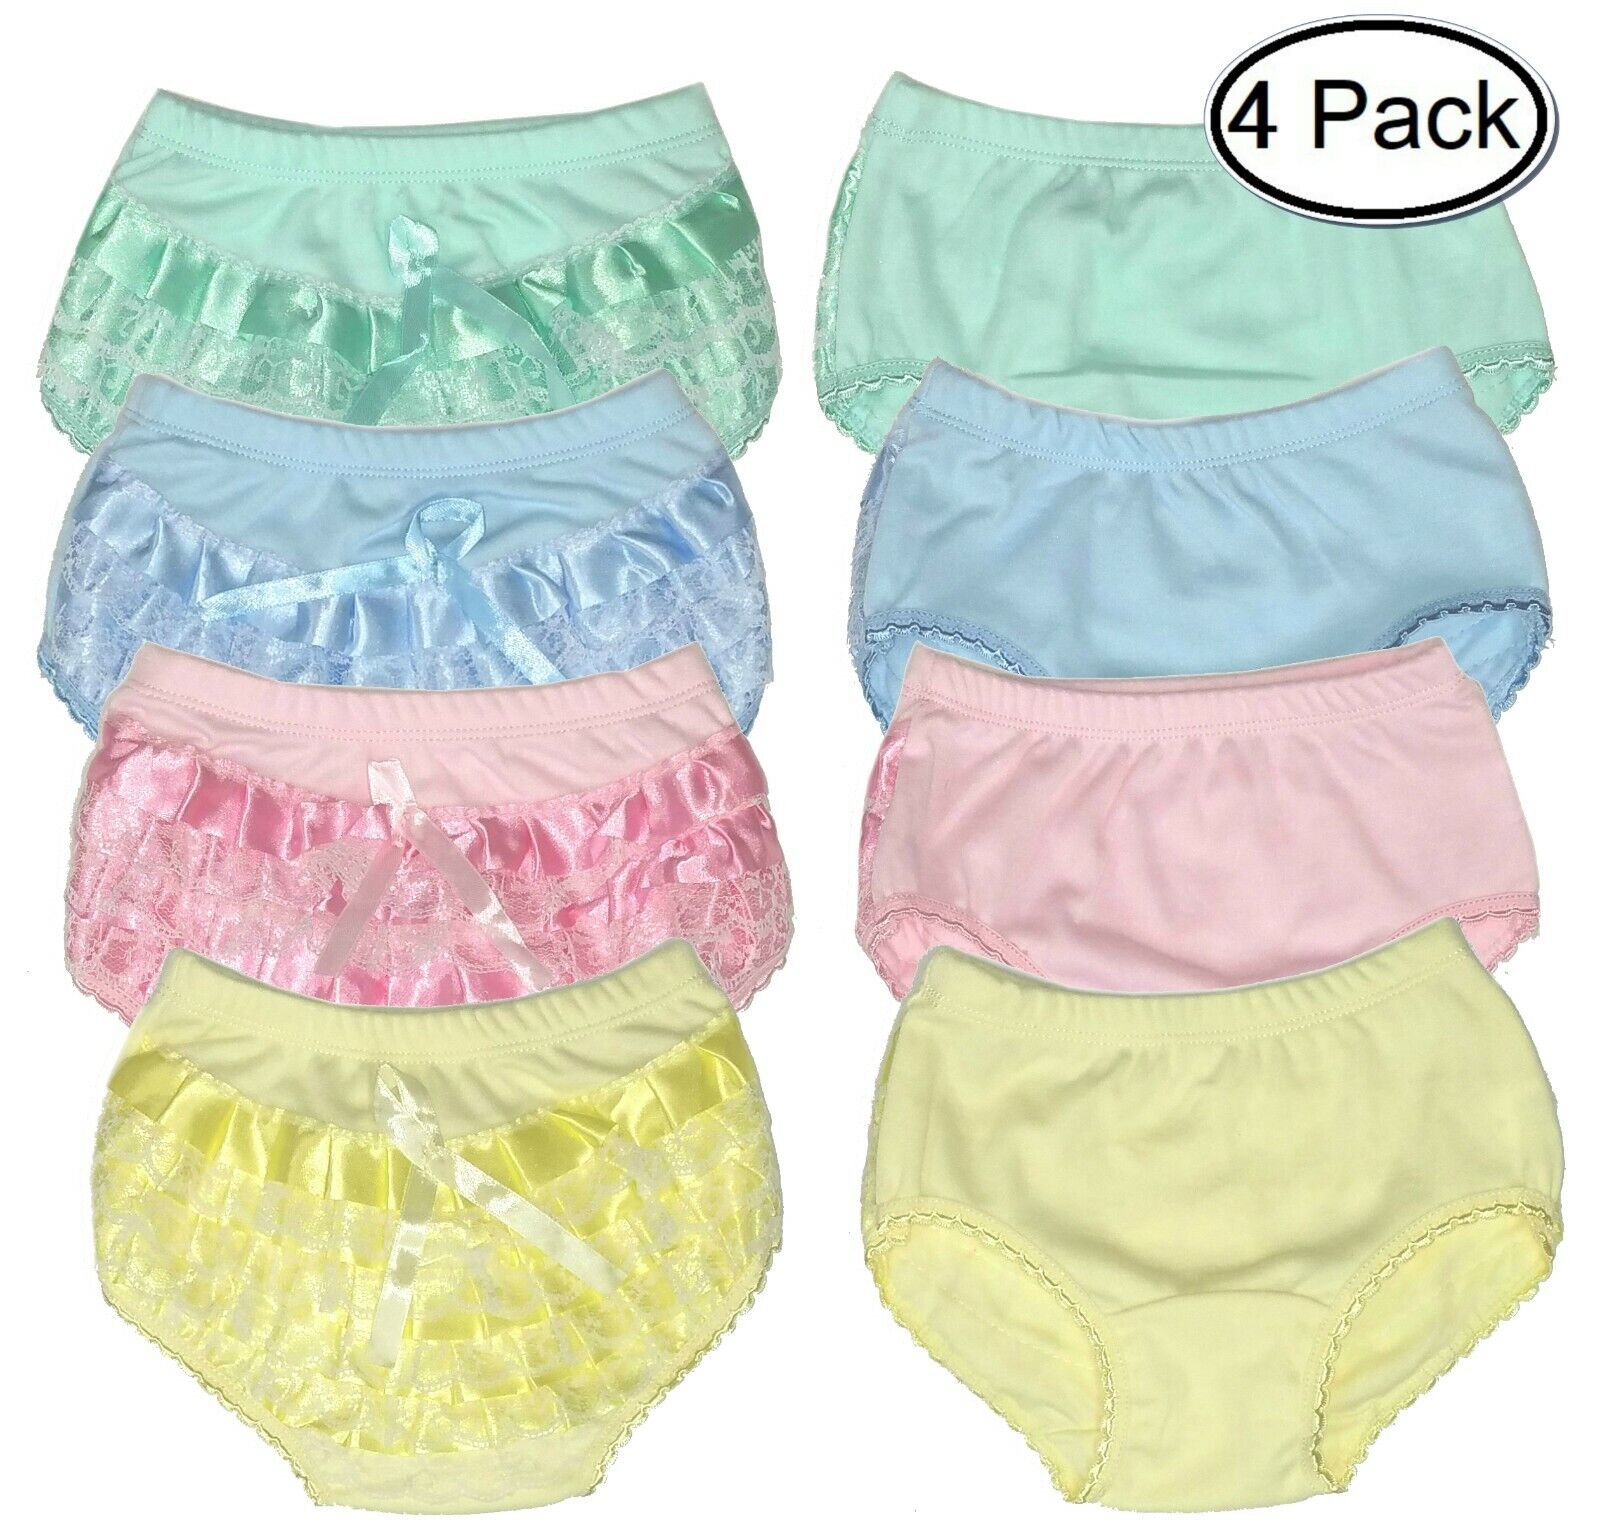 Diaper Cover Baby Bloomers  Cloth Lace Ruffle Toddler Girls Panties 4-Pack Rumba Strawberry Does Not Apply